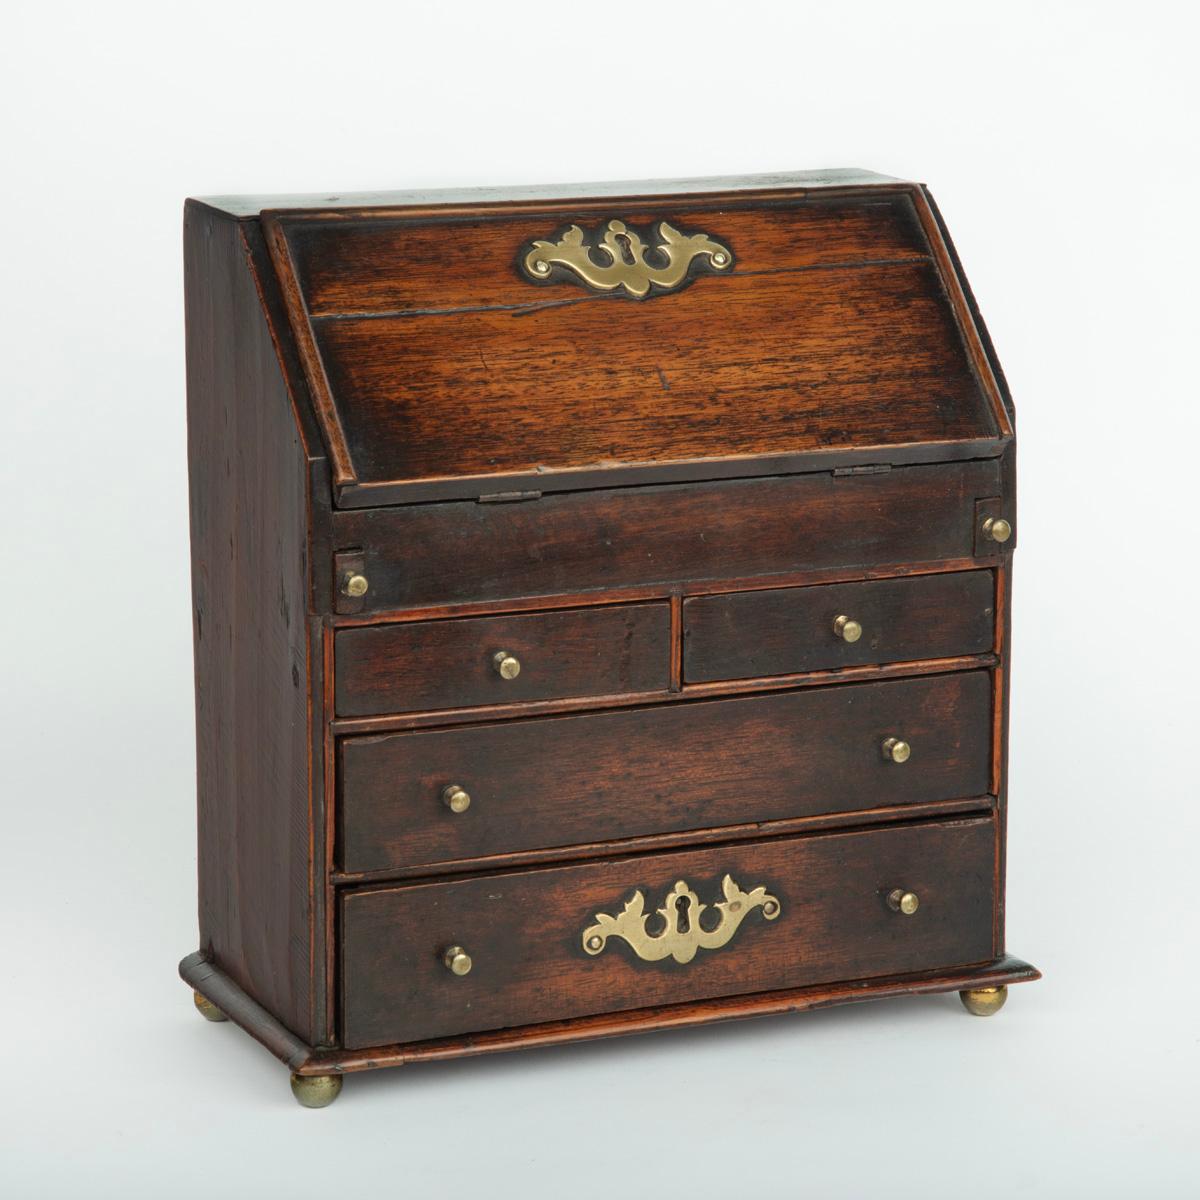 A miniature George III mahogany bureau apprentice piece, of rectangular form with a fall front and fitted pine interior with an arrangement of small drawers and pigeon holes, all above two short and two graduated long drawers, raised on brass bun